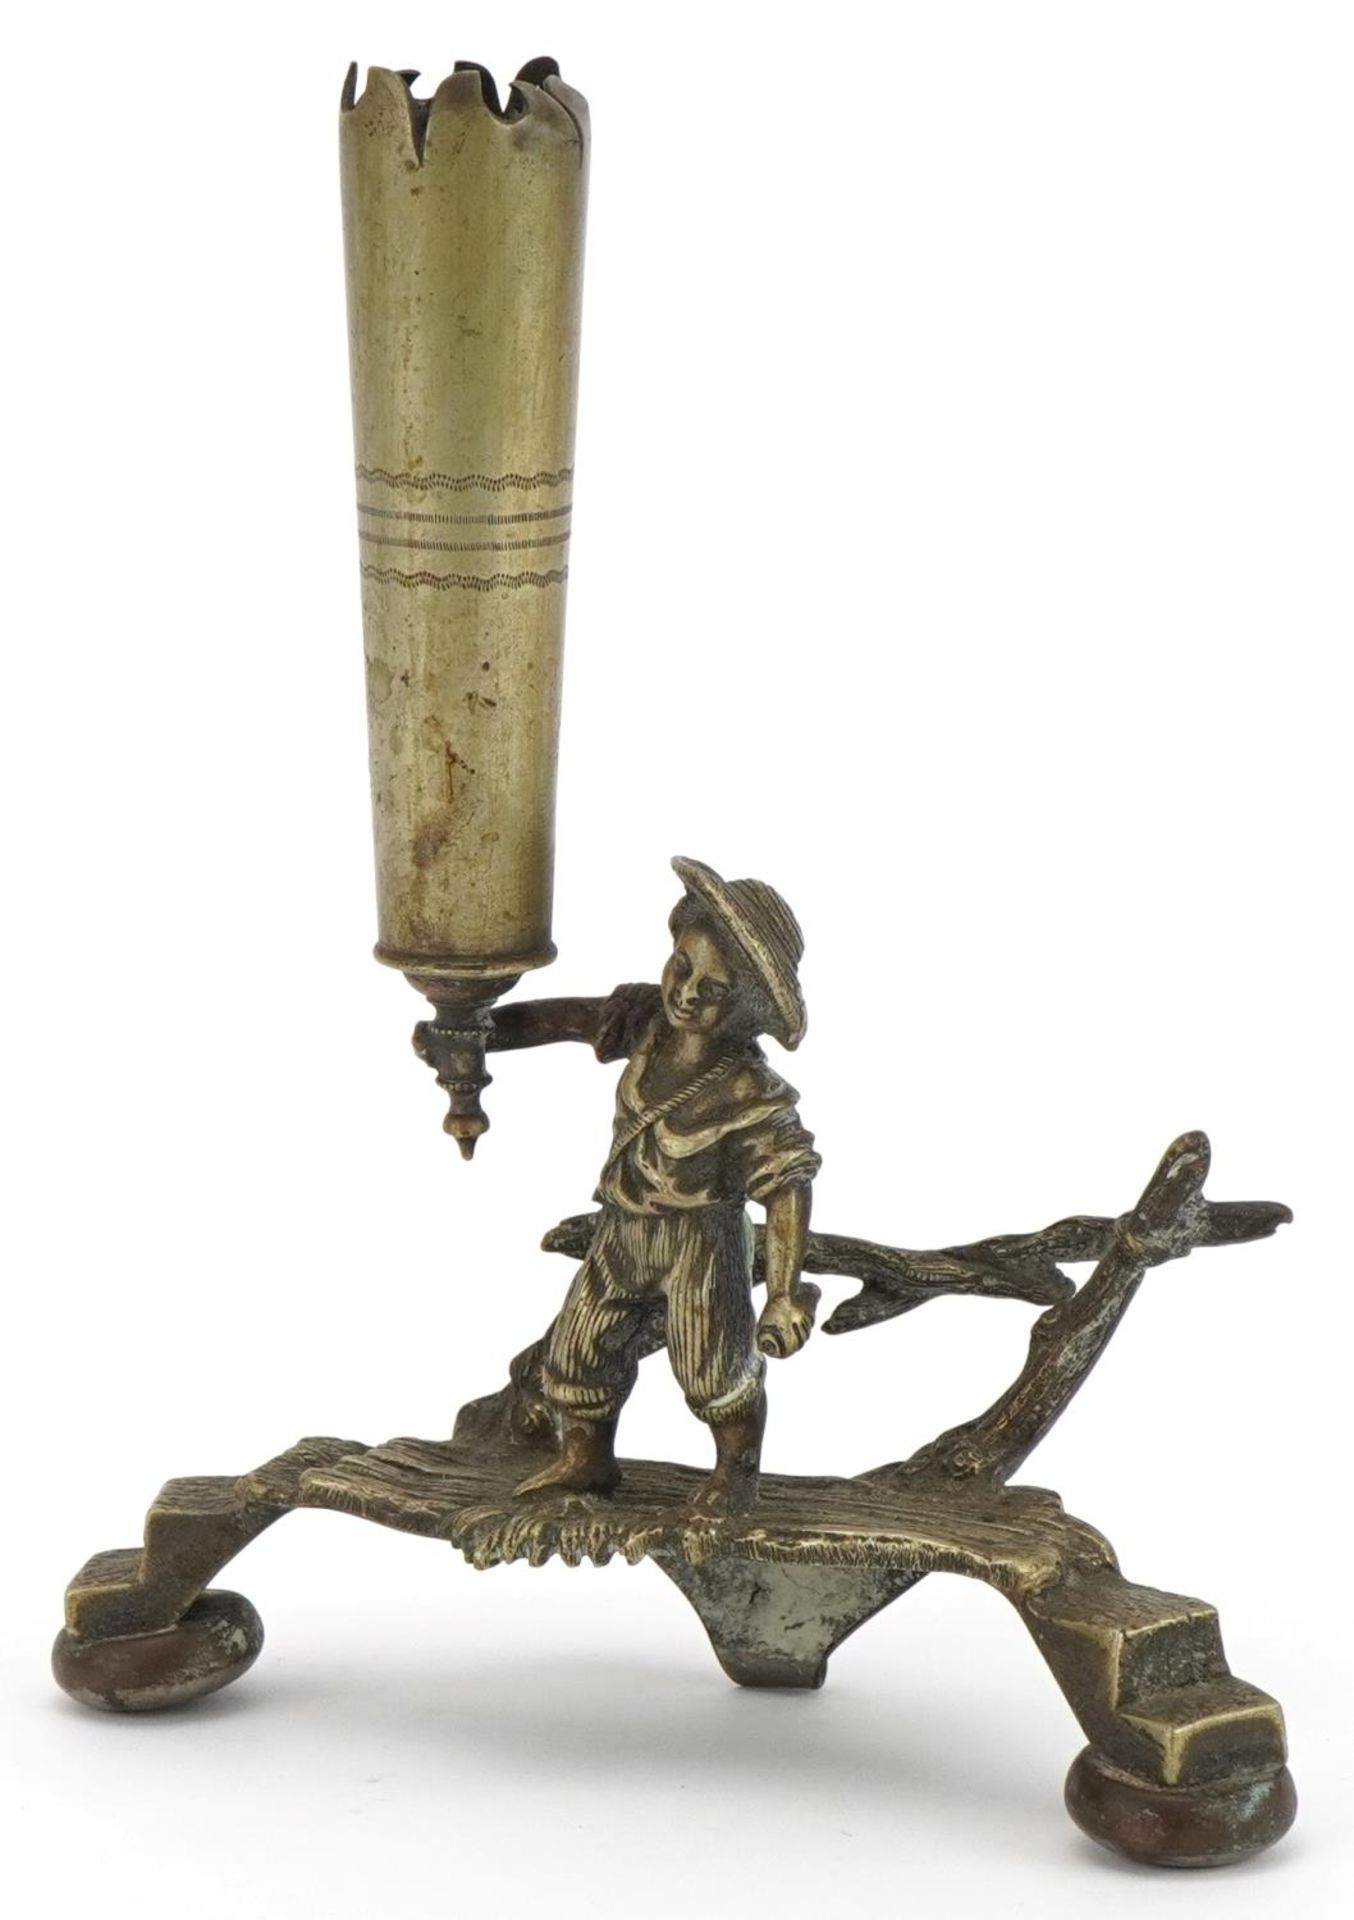 19th century silver plated epergne base in the form of a boy before a fence, 19cm high : For further